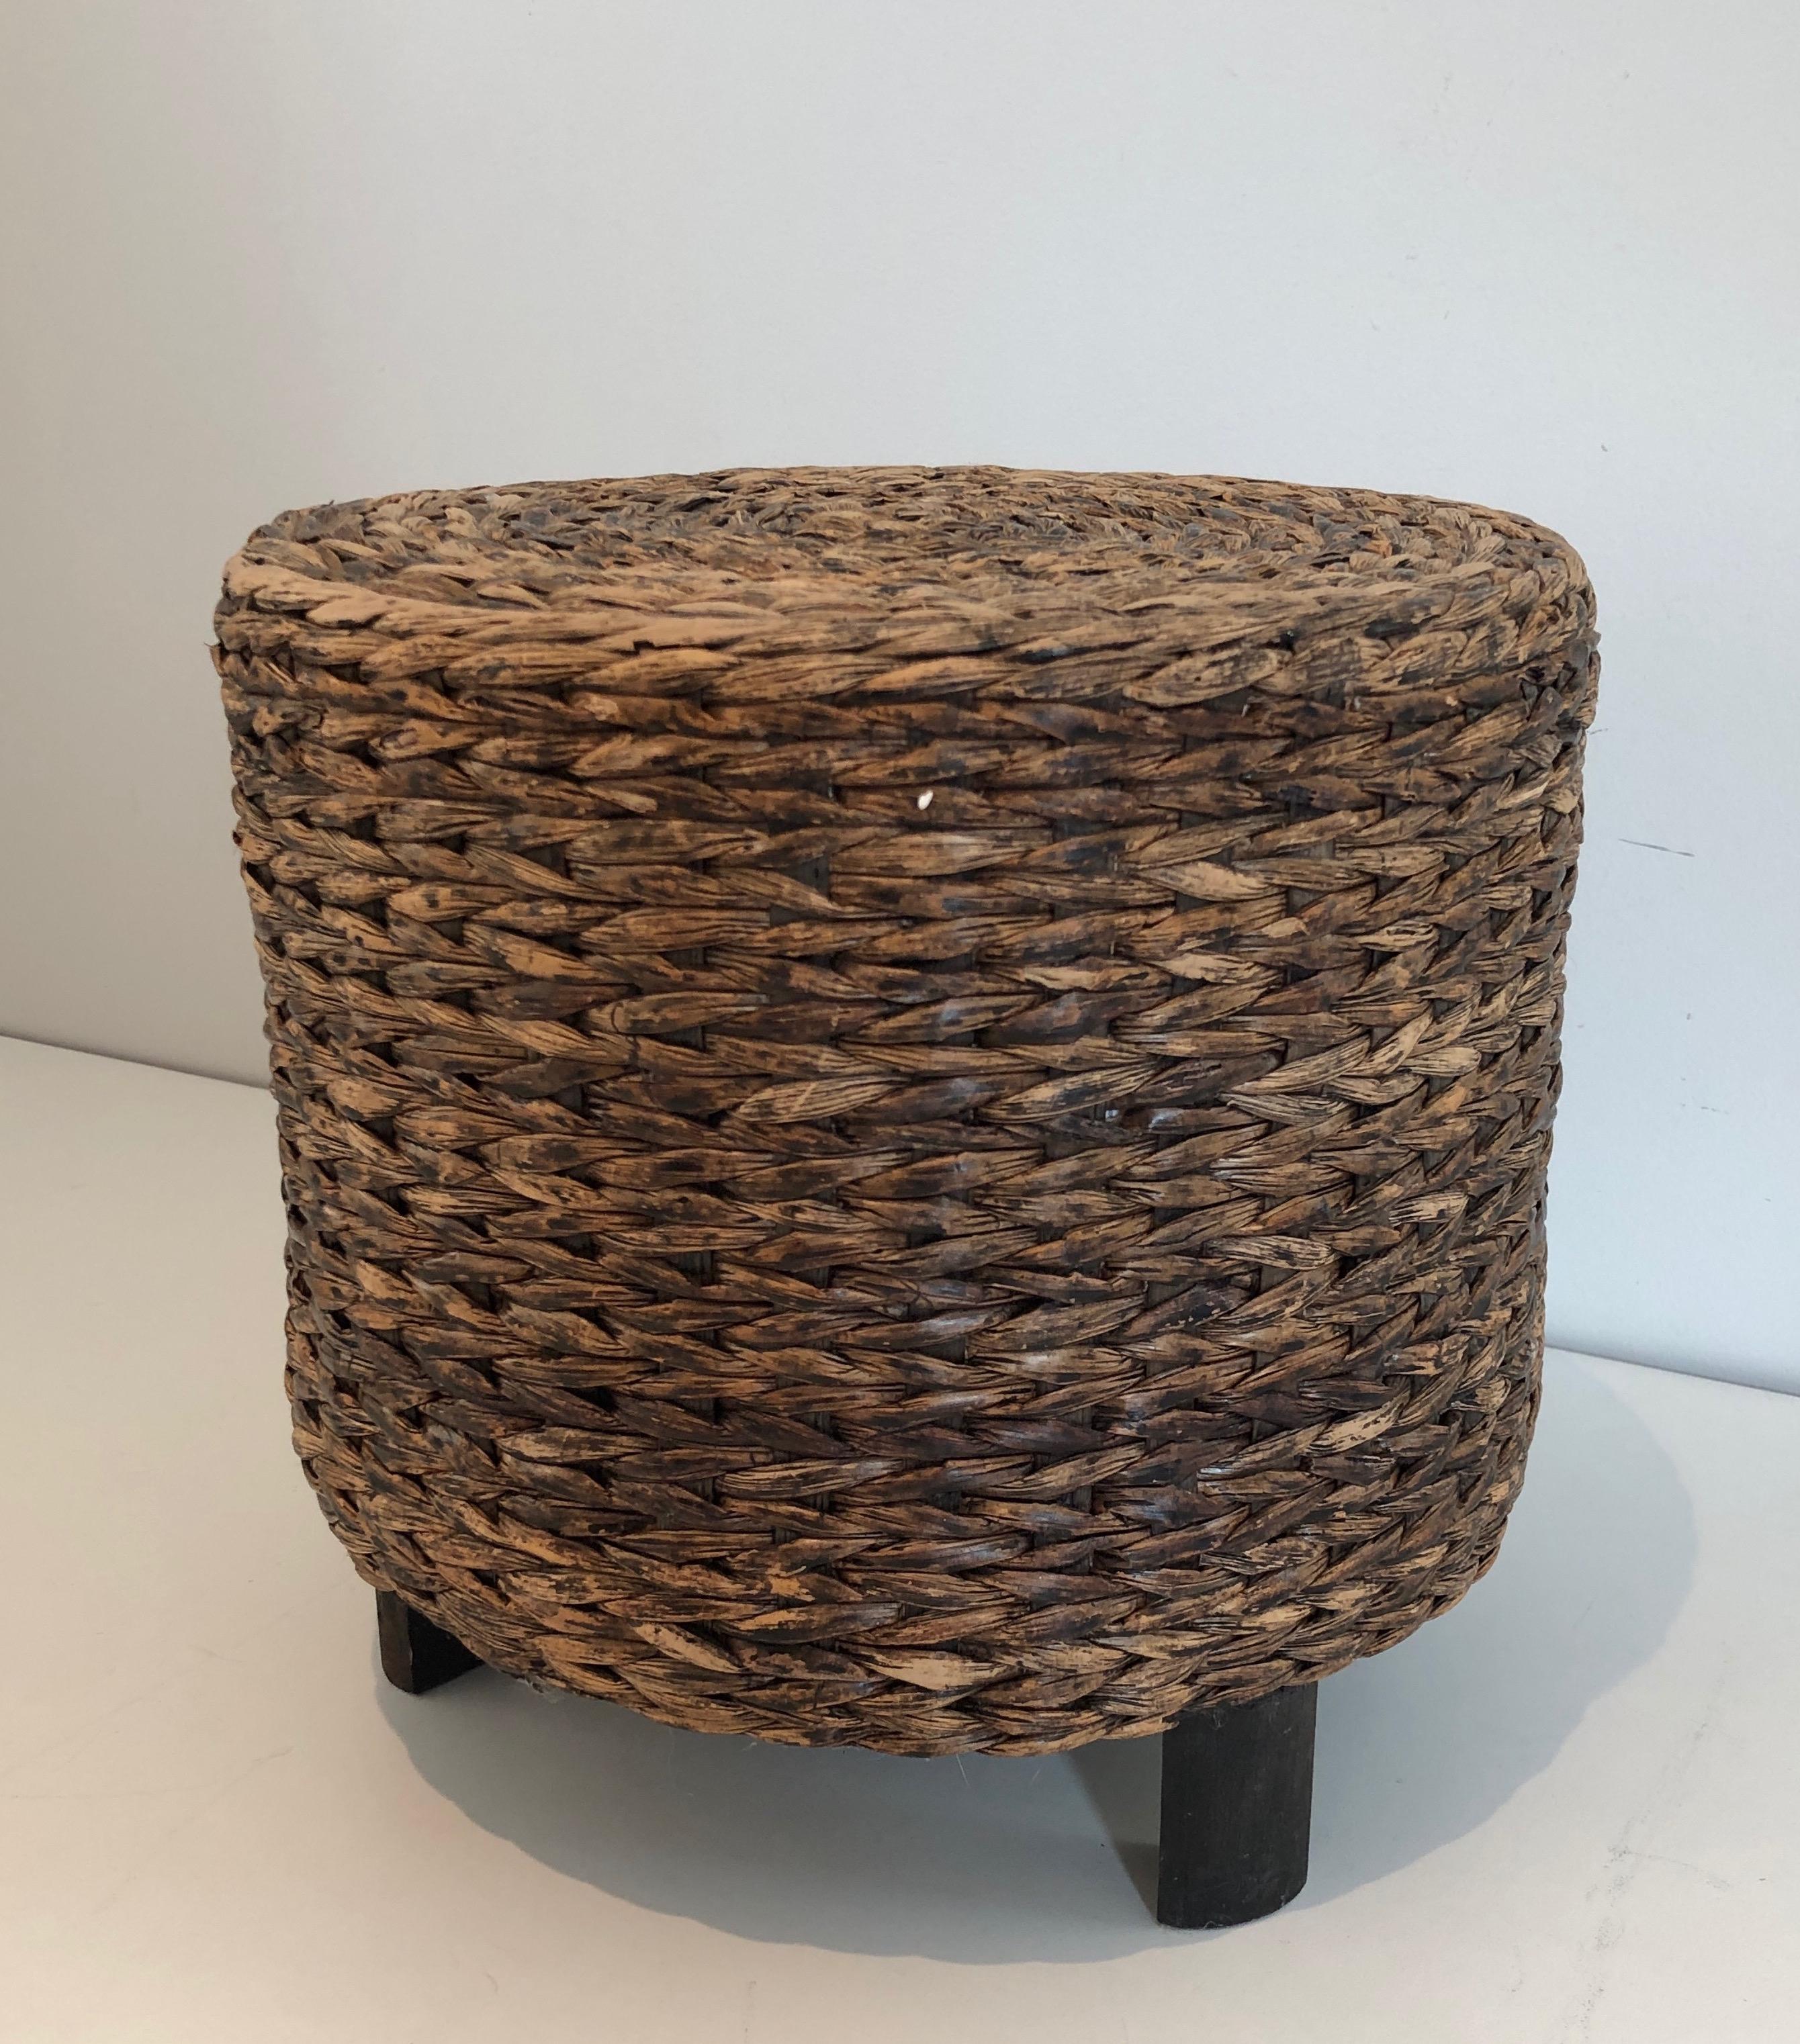 Small Rope Stool in the Style of Adrien Audoux et Frida Minet. French work. For Sale 1